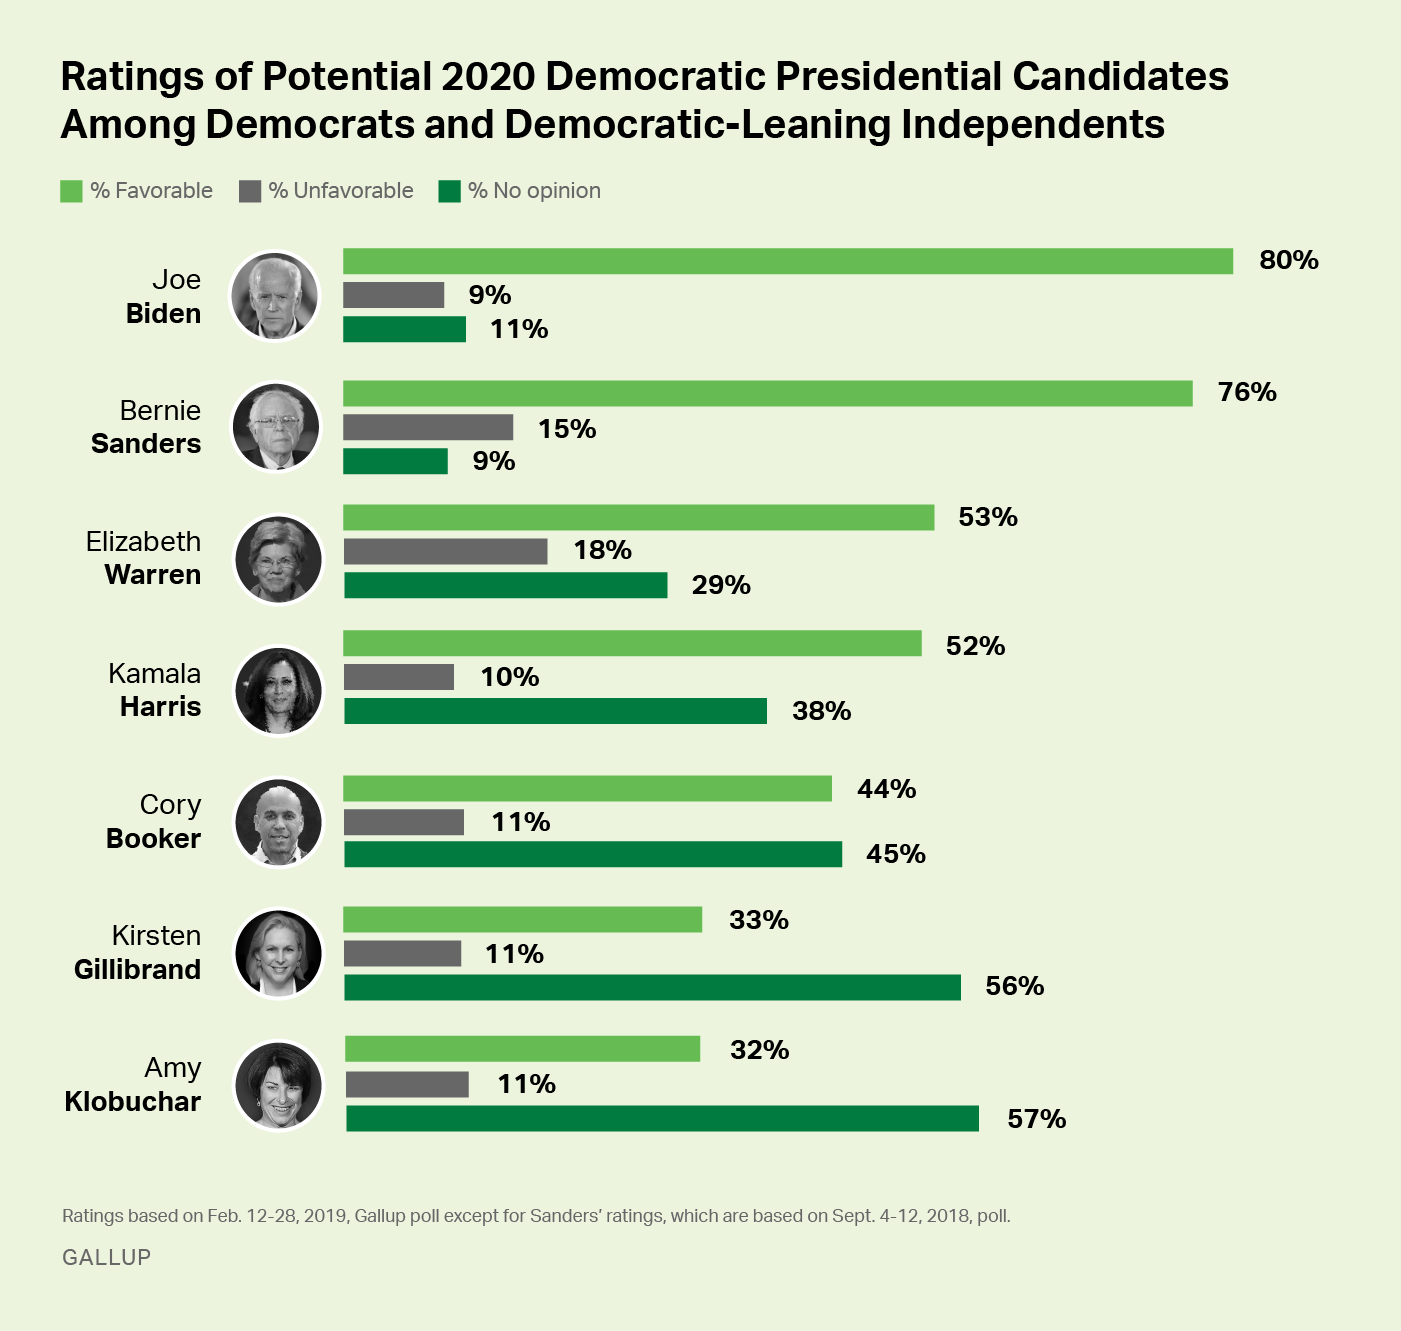 Bar graph: Favorability ratings of 7 potential 2020 Democratic presidential candidates, among Democrats + Democratic leaners.